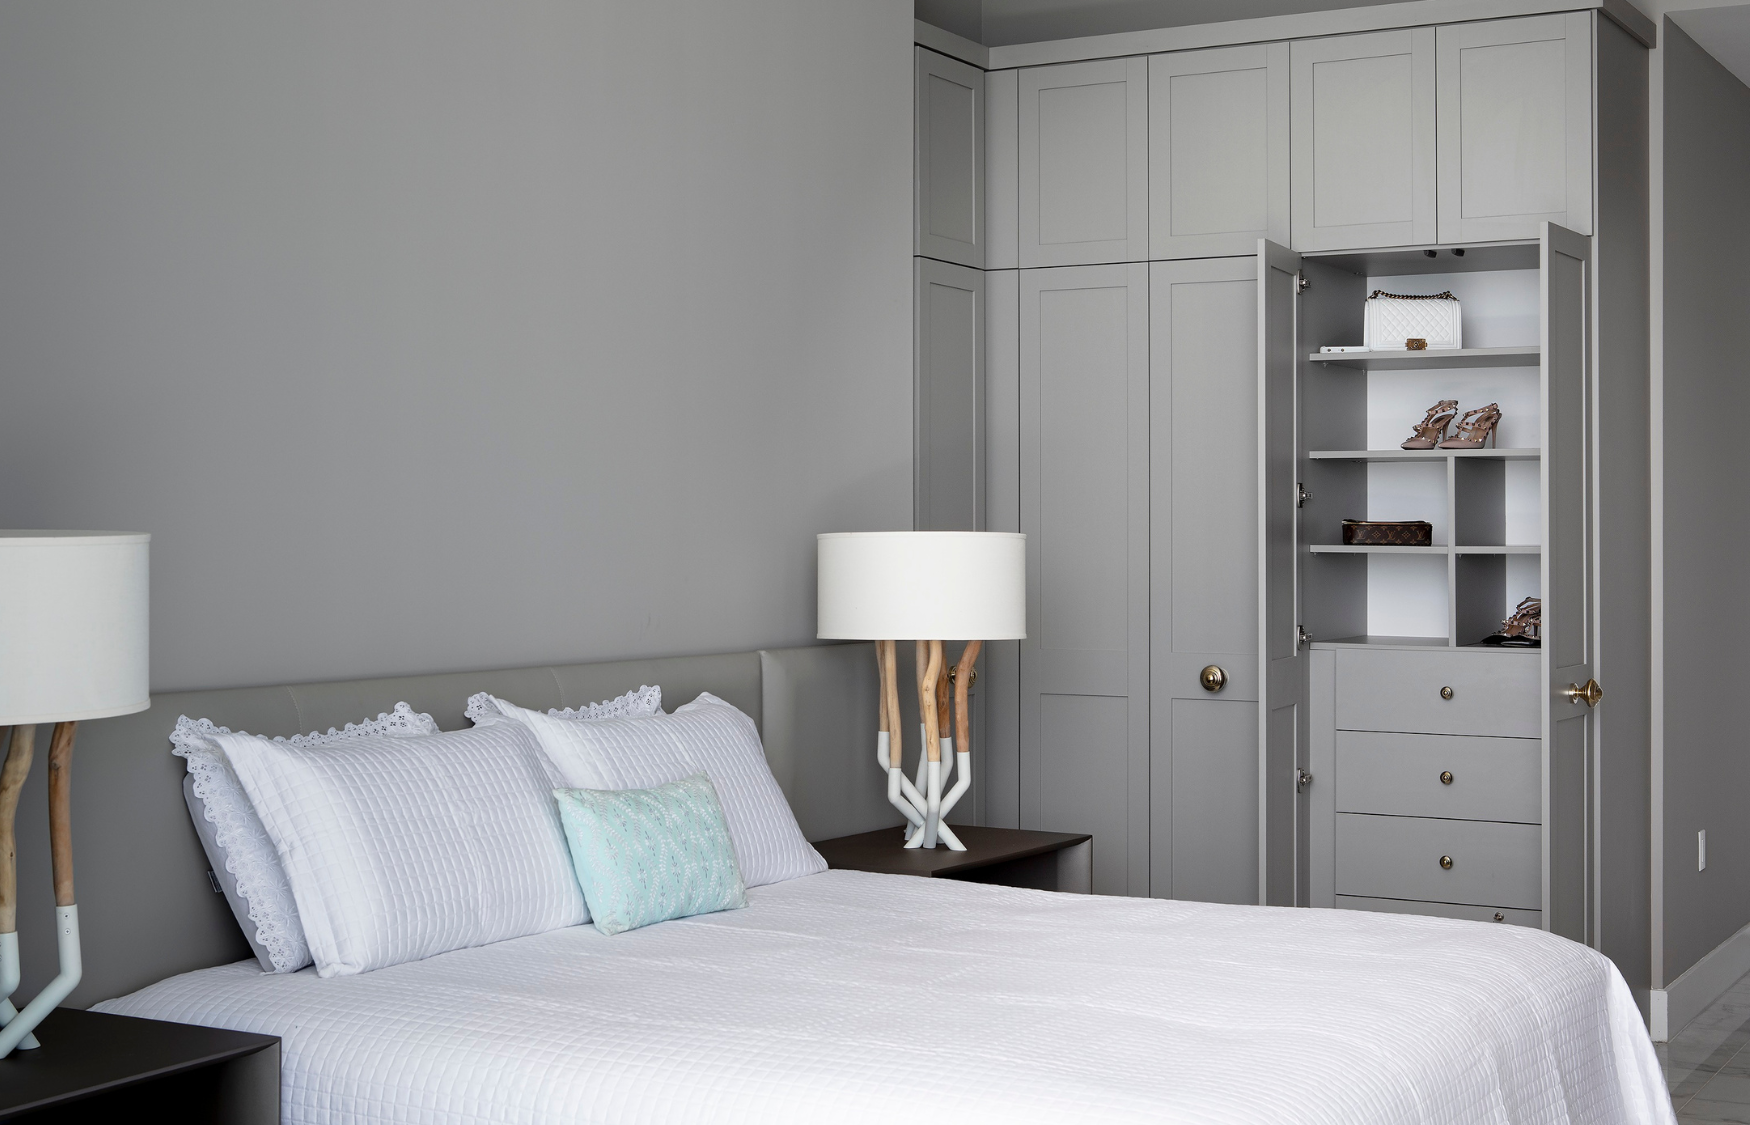 This spare guest room that did not have any closet space was transformed into a functional sleeping area with a custom wardrobe. Using a finish that aesthetically matches the tones of the room, this custom wardrobe holds room for hanging, shelving and sleek drawers behind doors. Photo Creds: Michael Butler